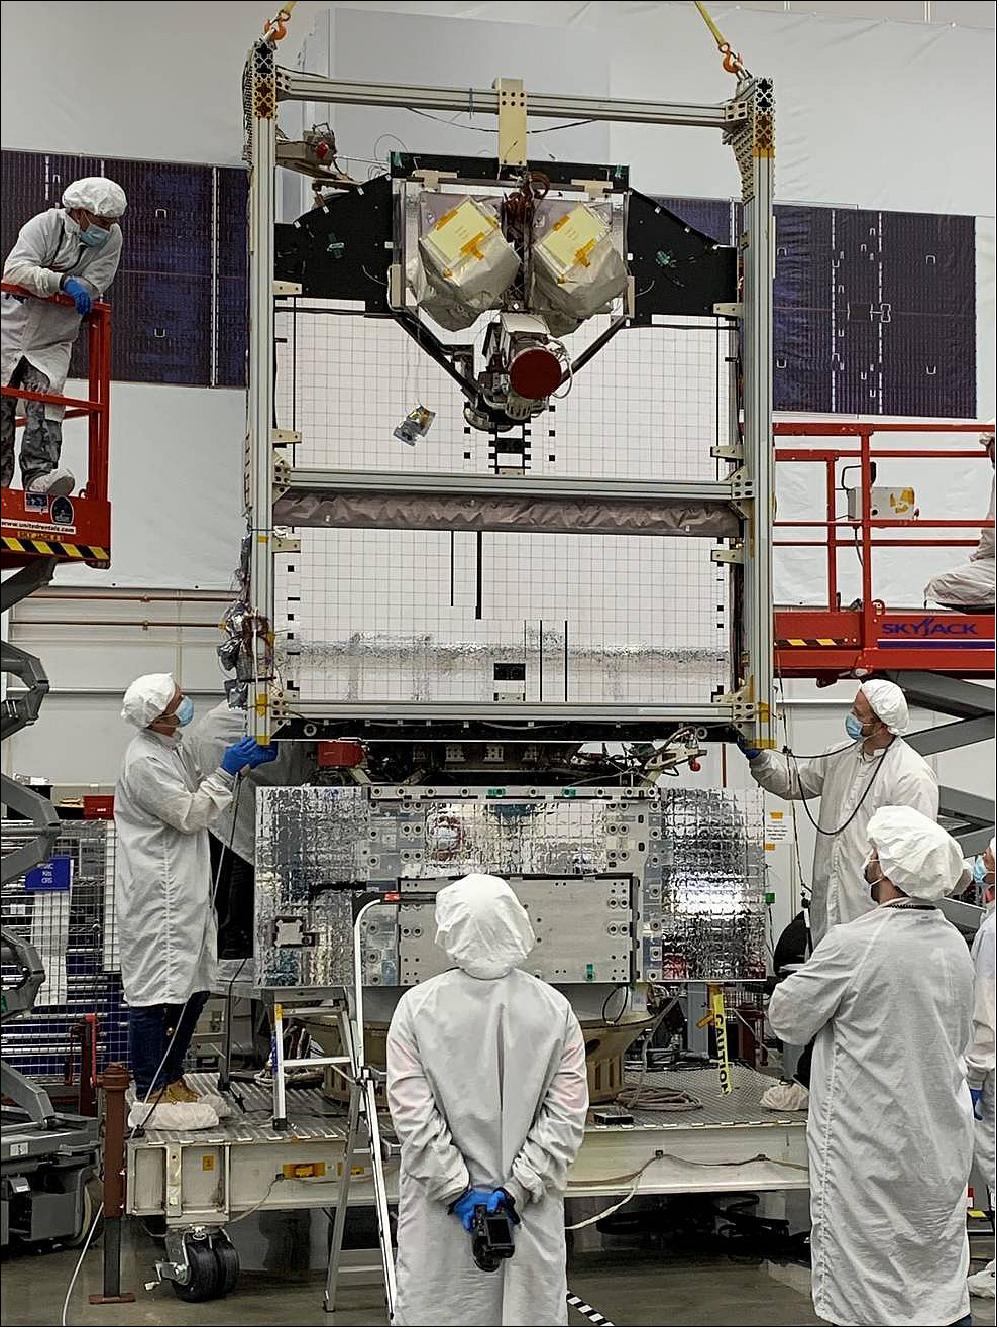 Figure 6: Northrop Grumman technicians in front of the LCRD payload fully installed and integrated on the Space Test Program Satellite (STPSat-6), image credits: NGSS (Northrop Grumman Space Systems)